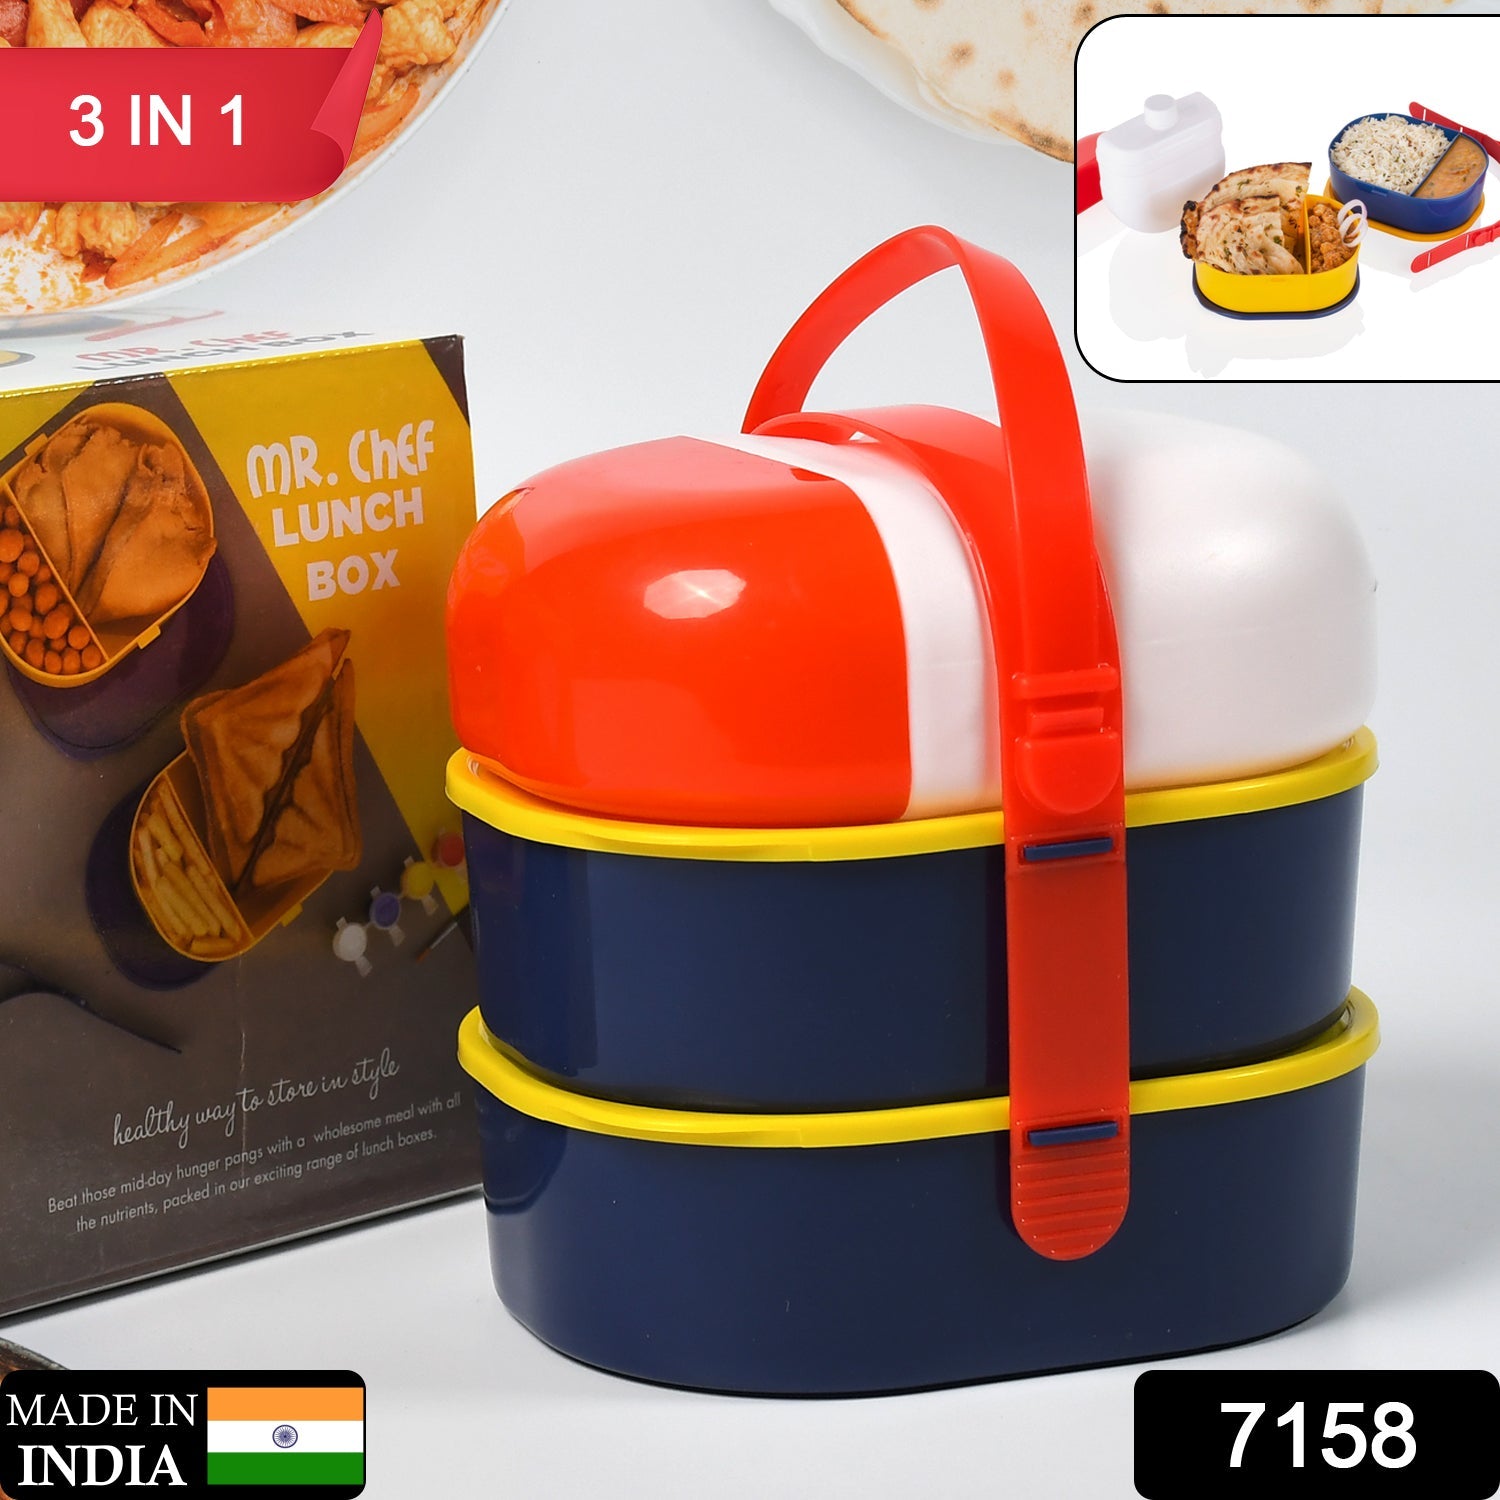 7158 Mr. Chef Smart Lunch Box Capsule shape strap-on lunch box with water bottle and handle 